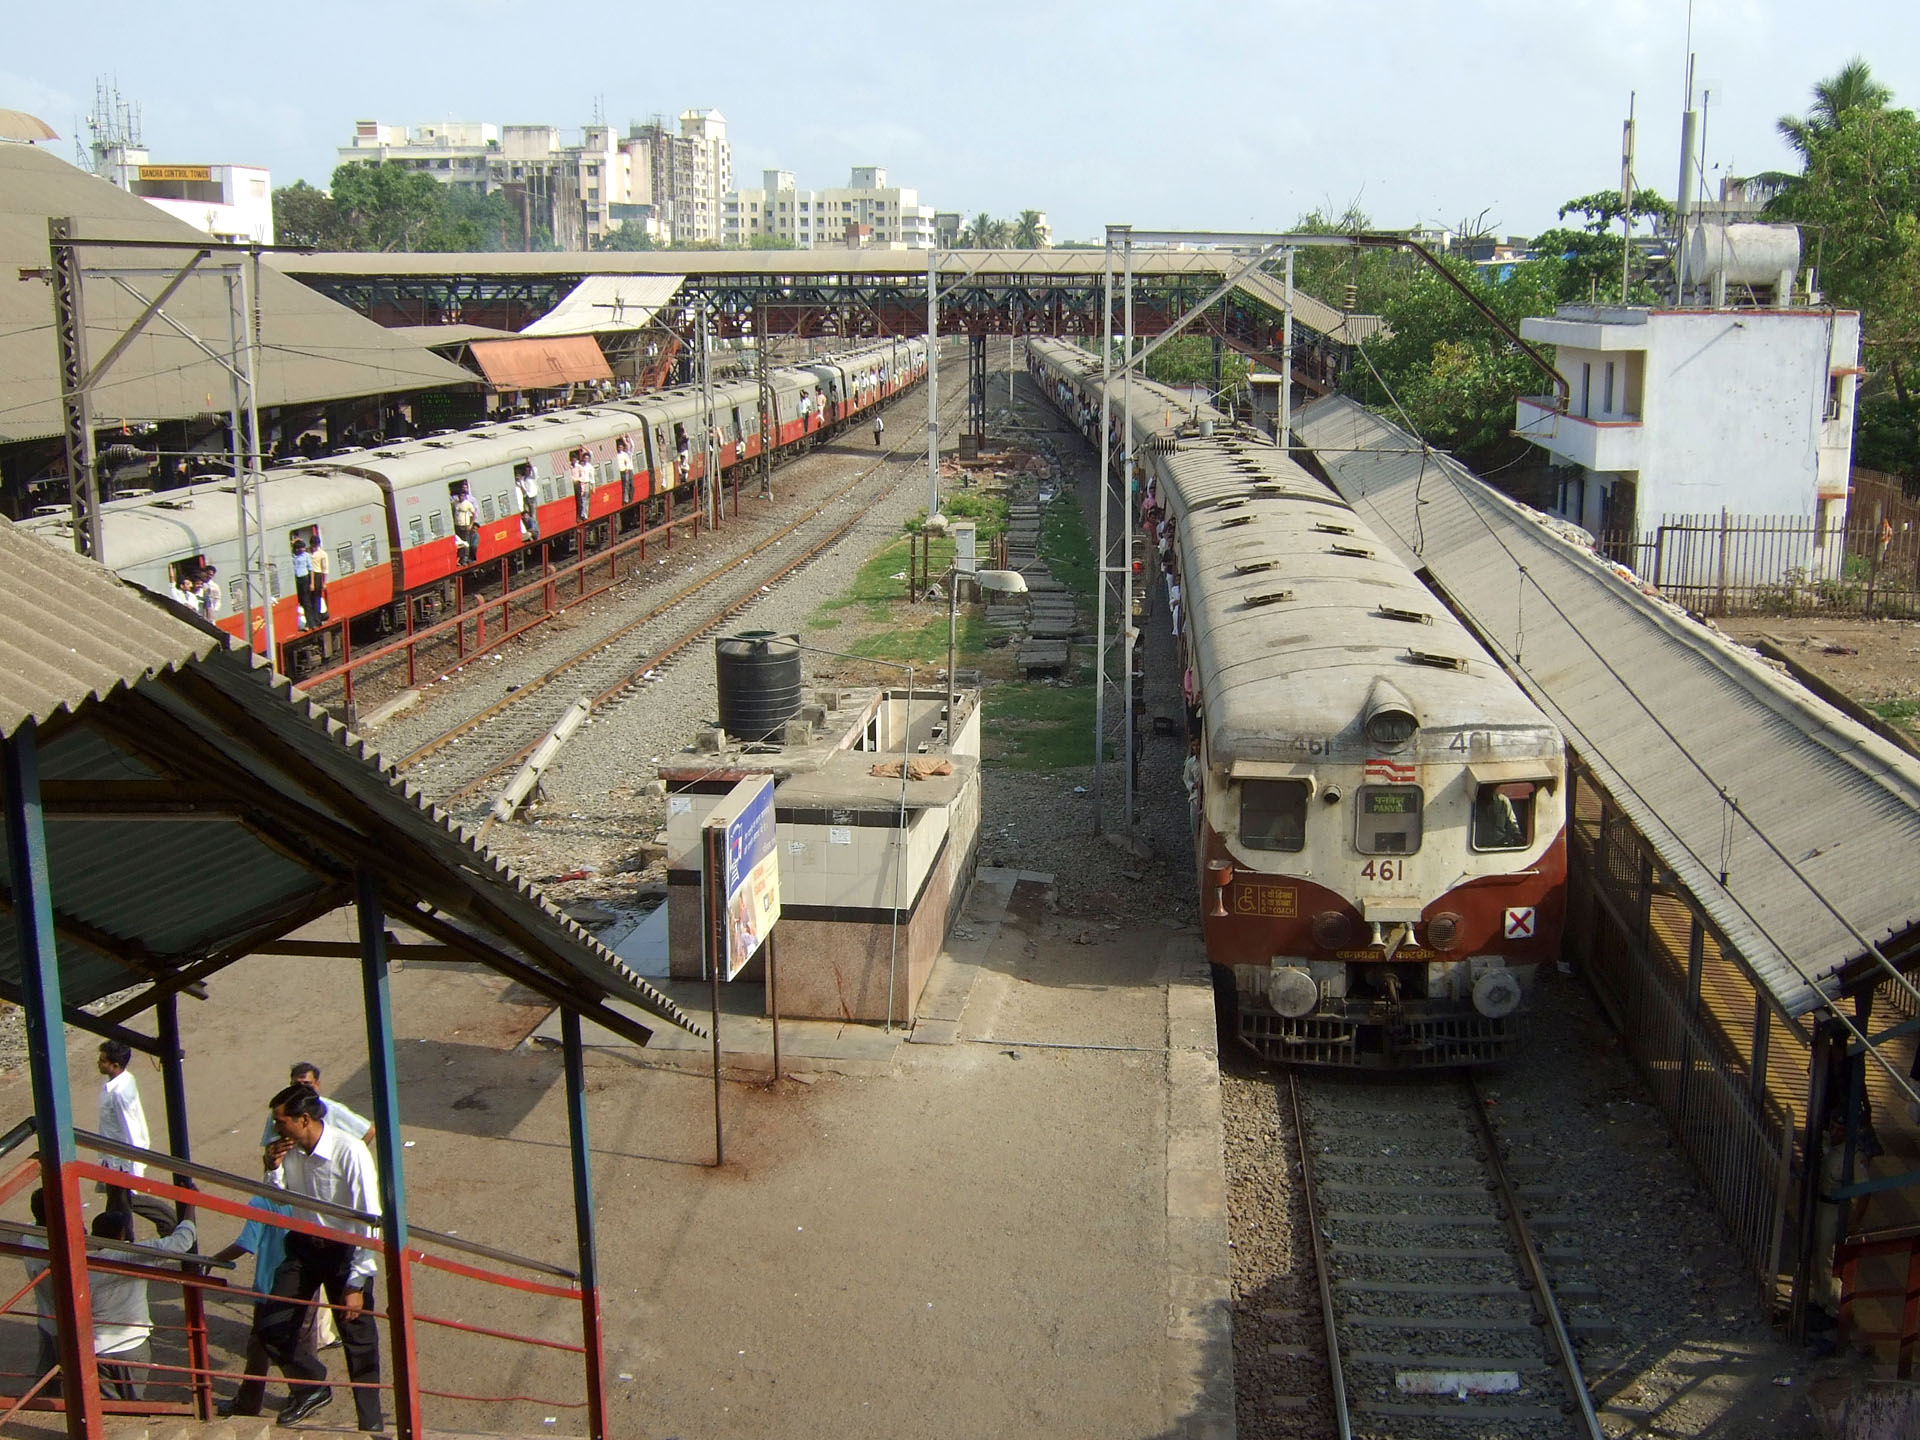 Railways to offer dynamic pricing. Representative image only. Image Source: Wikimedia Commons.